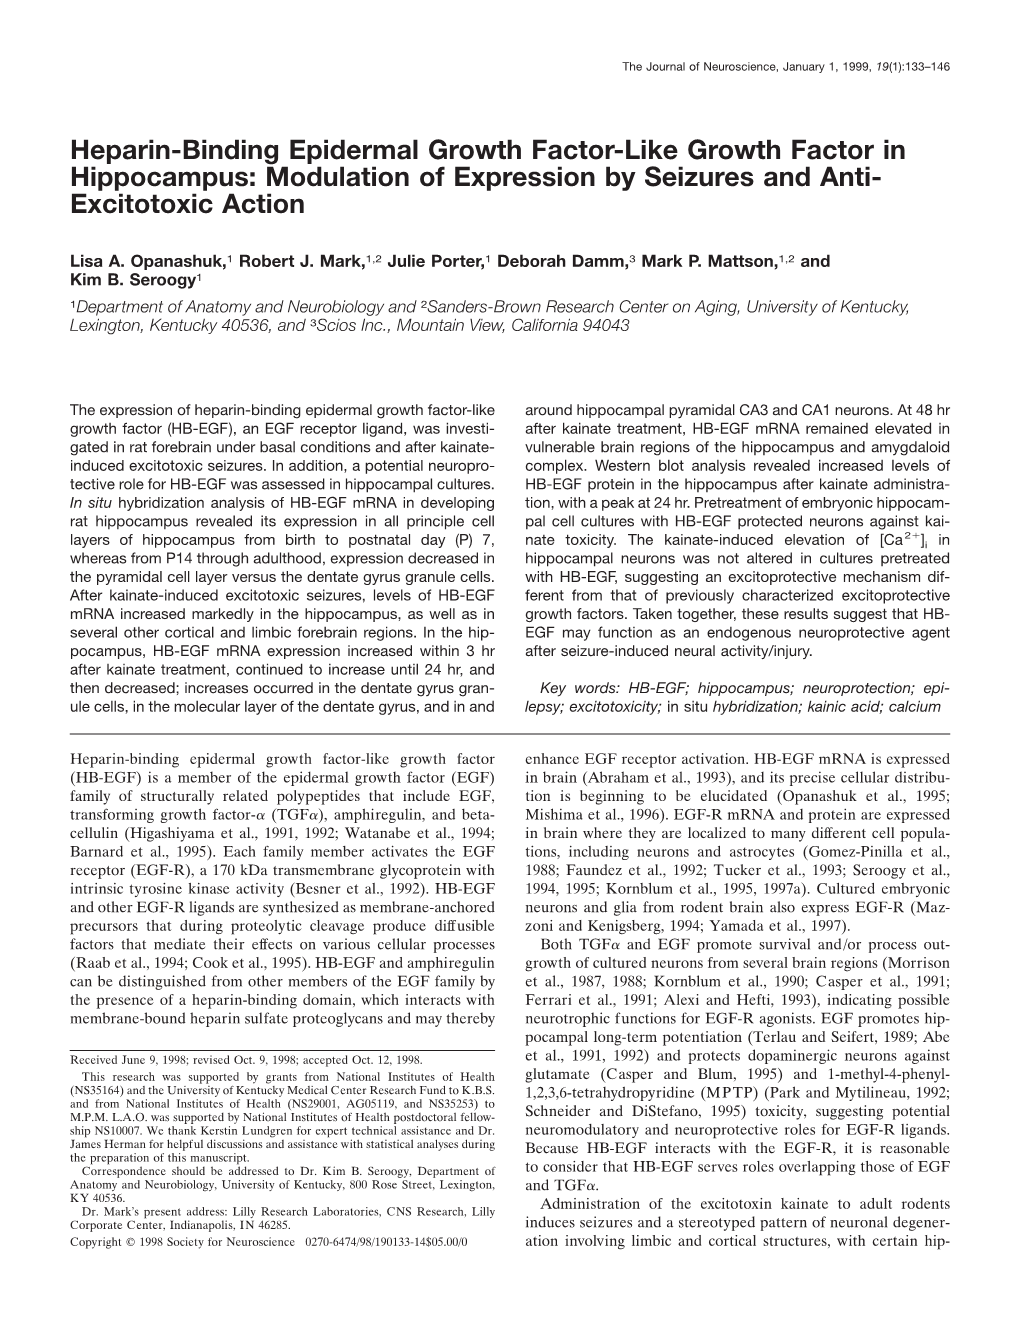 Heparin-Binding Epidermal Growth Factor-Like Growth Factor in Hippocampus: Modulation of Expression by Seizures and Anti- Excitotoxic Action